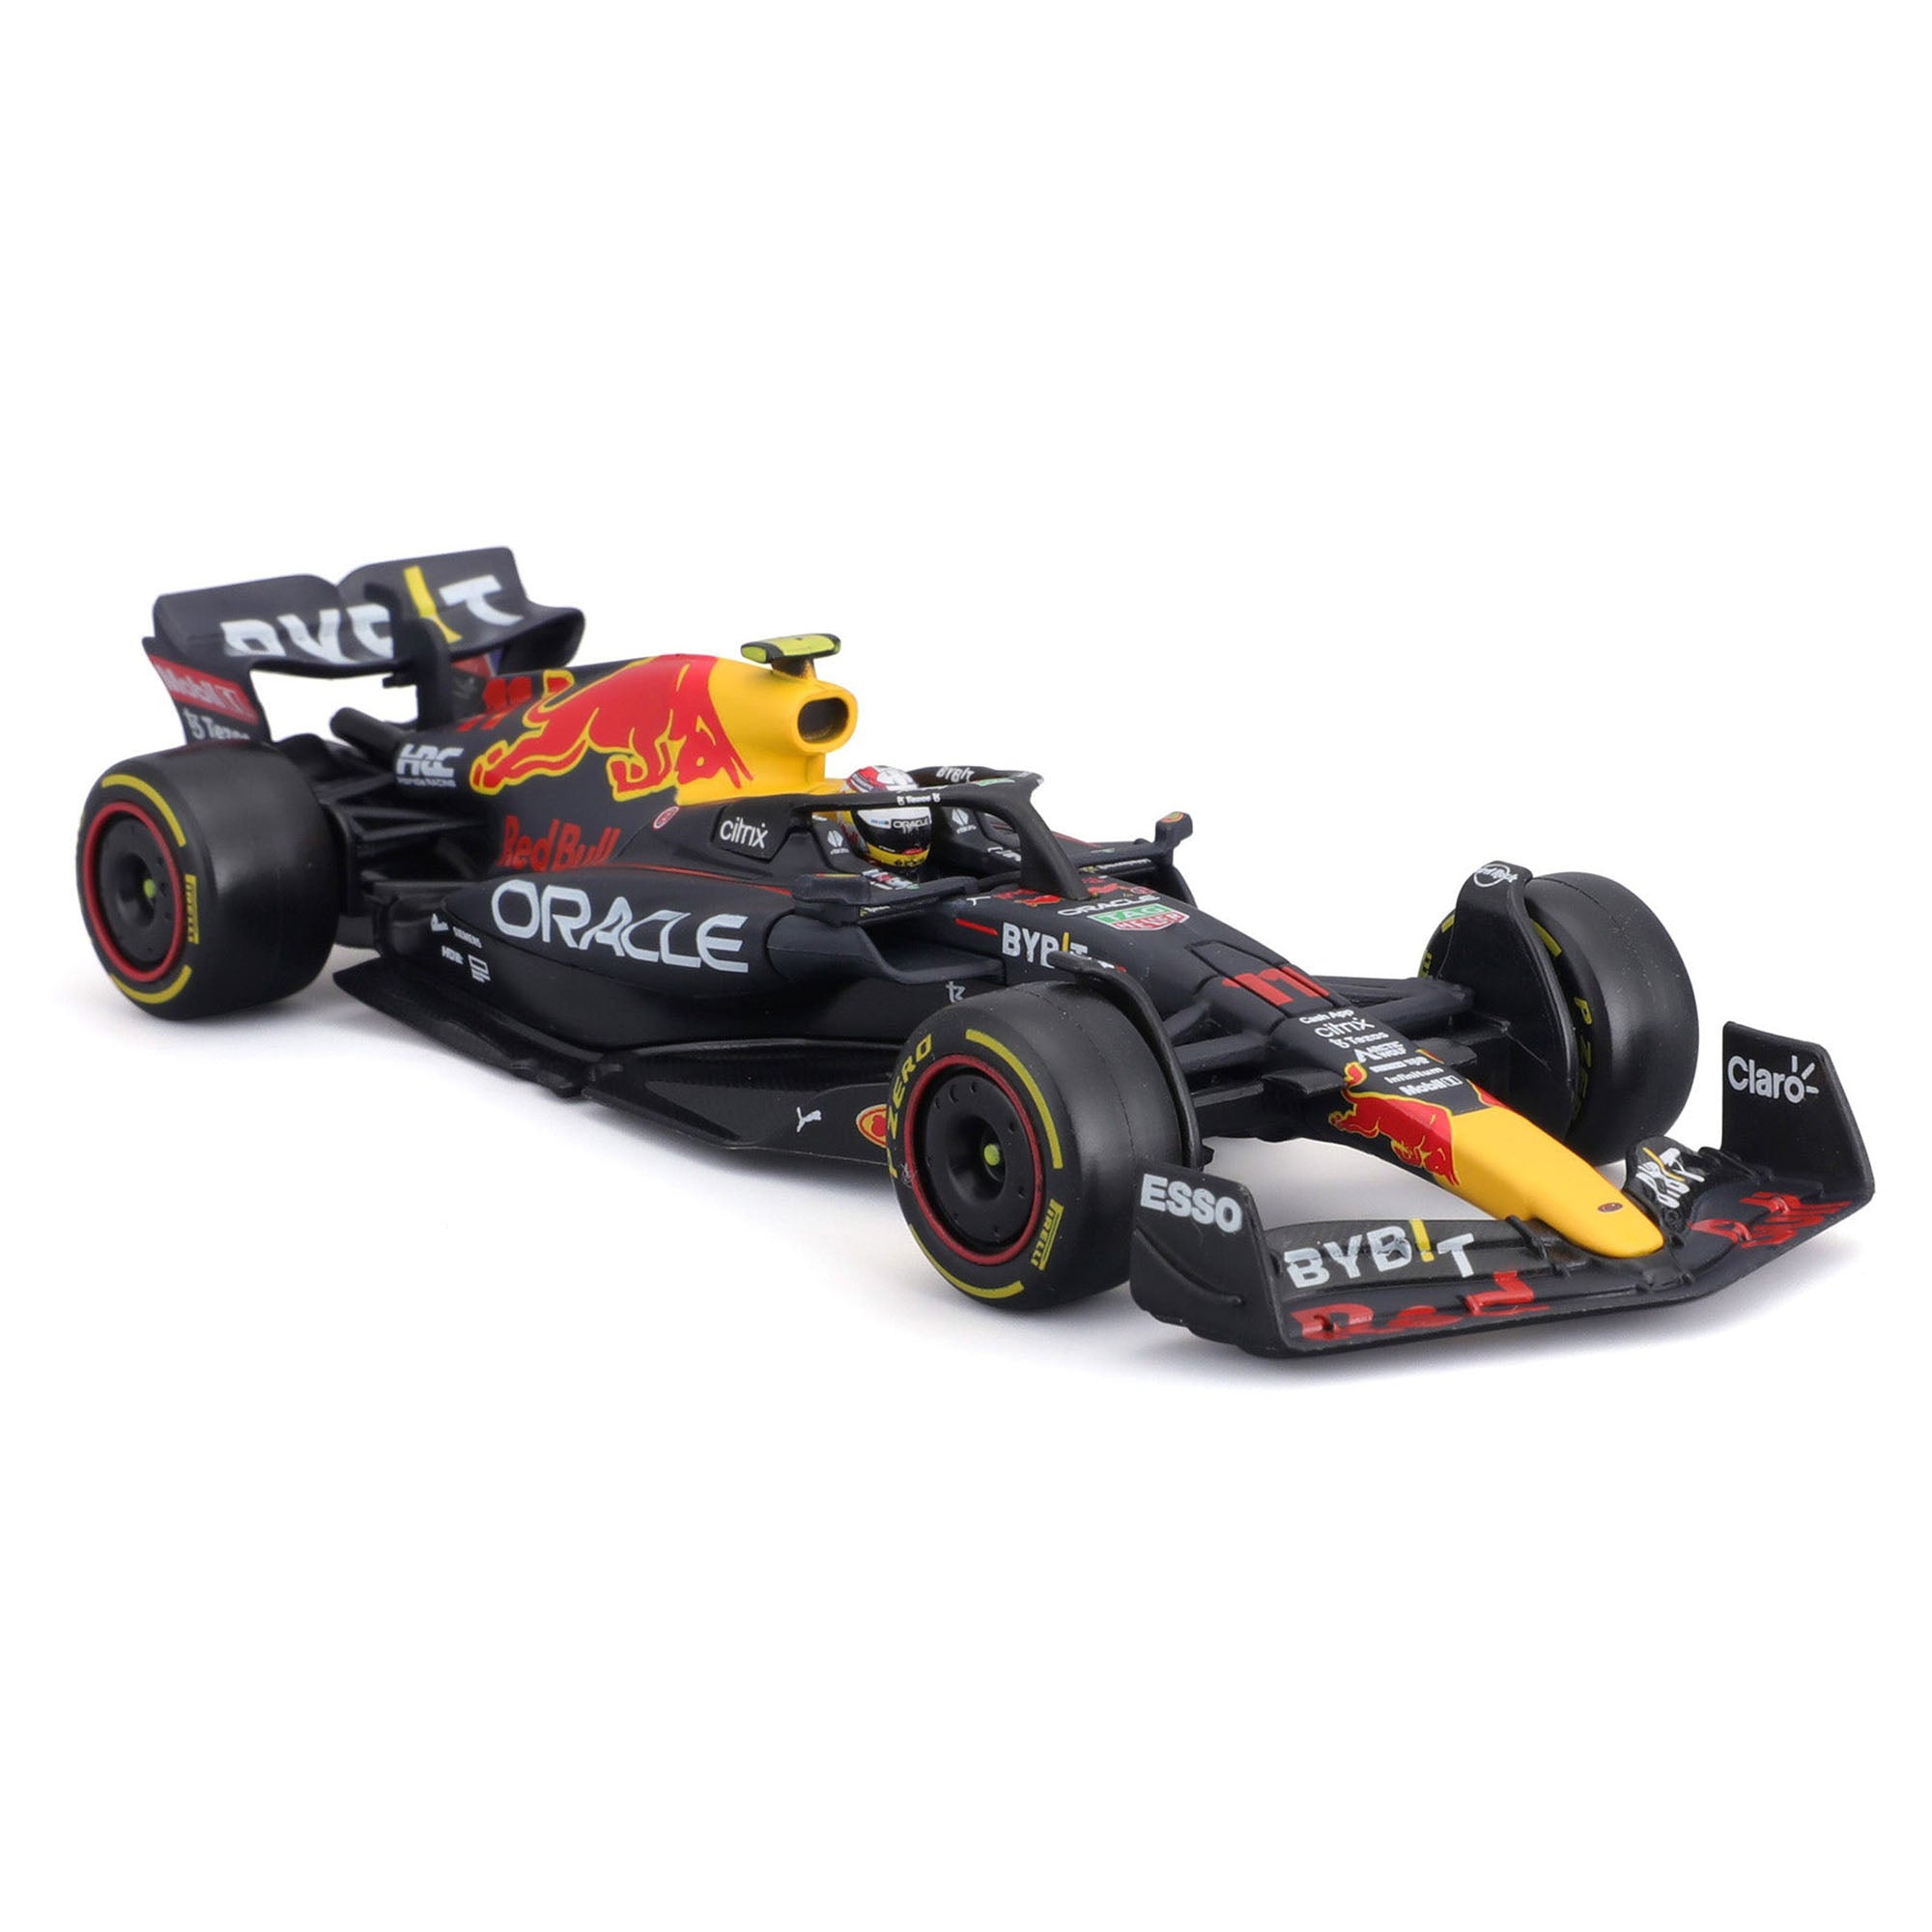 Bburago 1:43 2022 F-1 Red Bull Race RB 18 #11 Perez with Driver